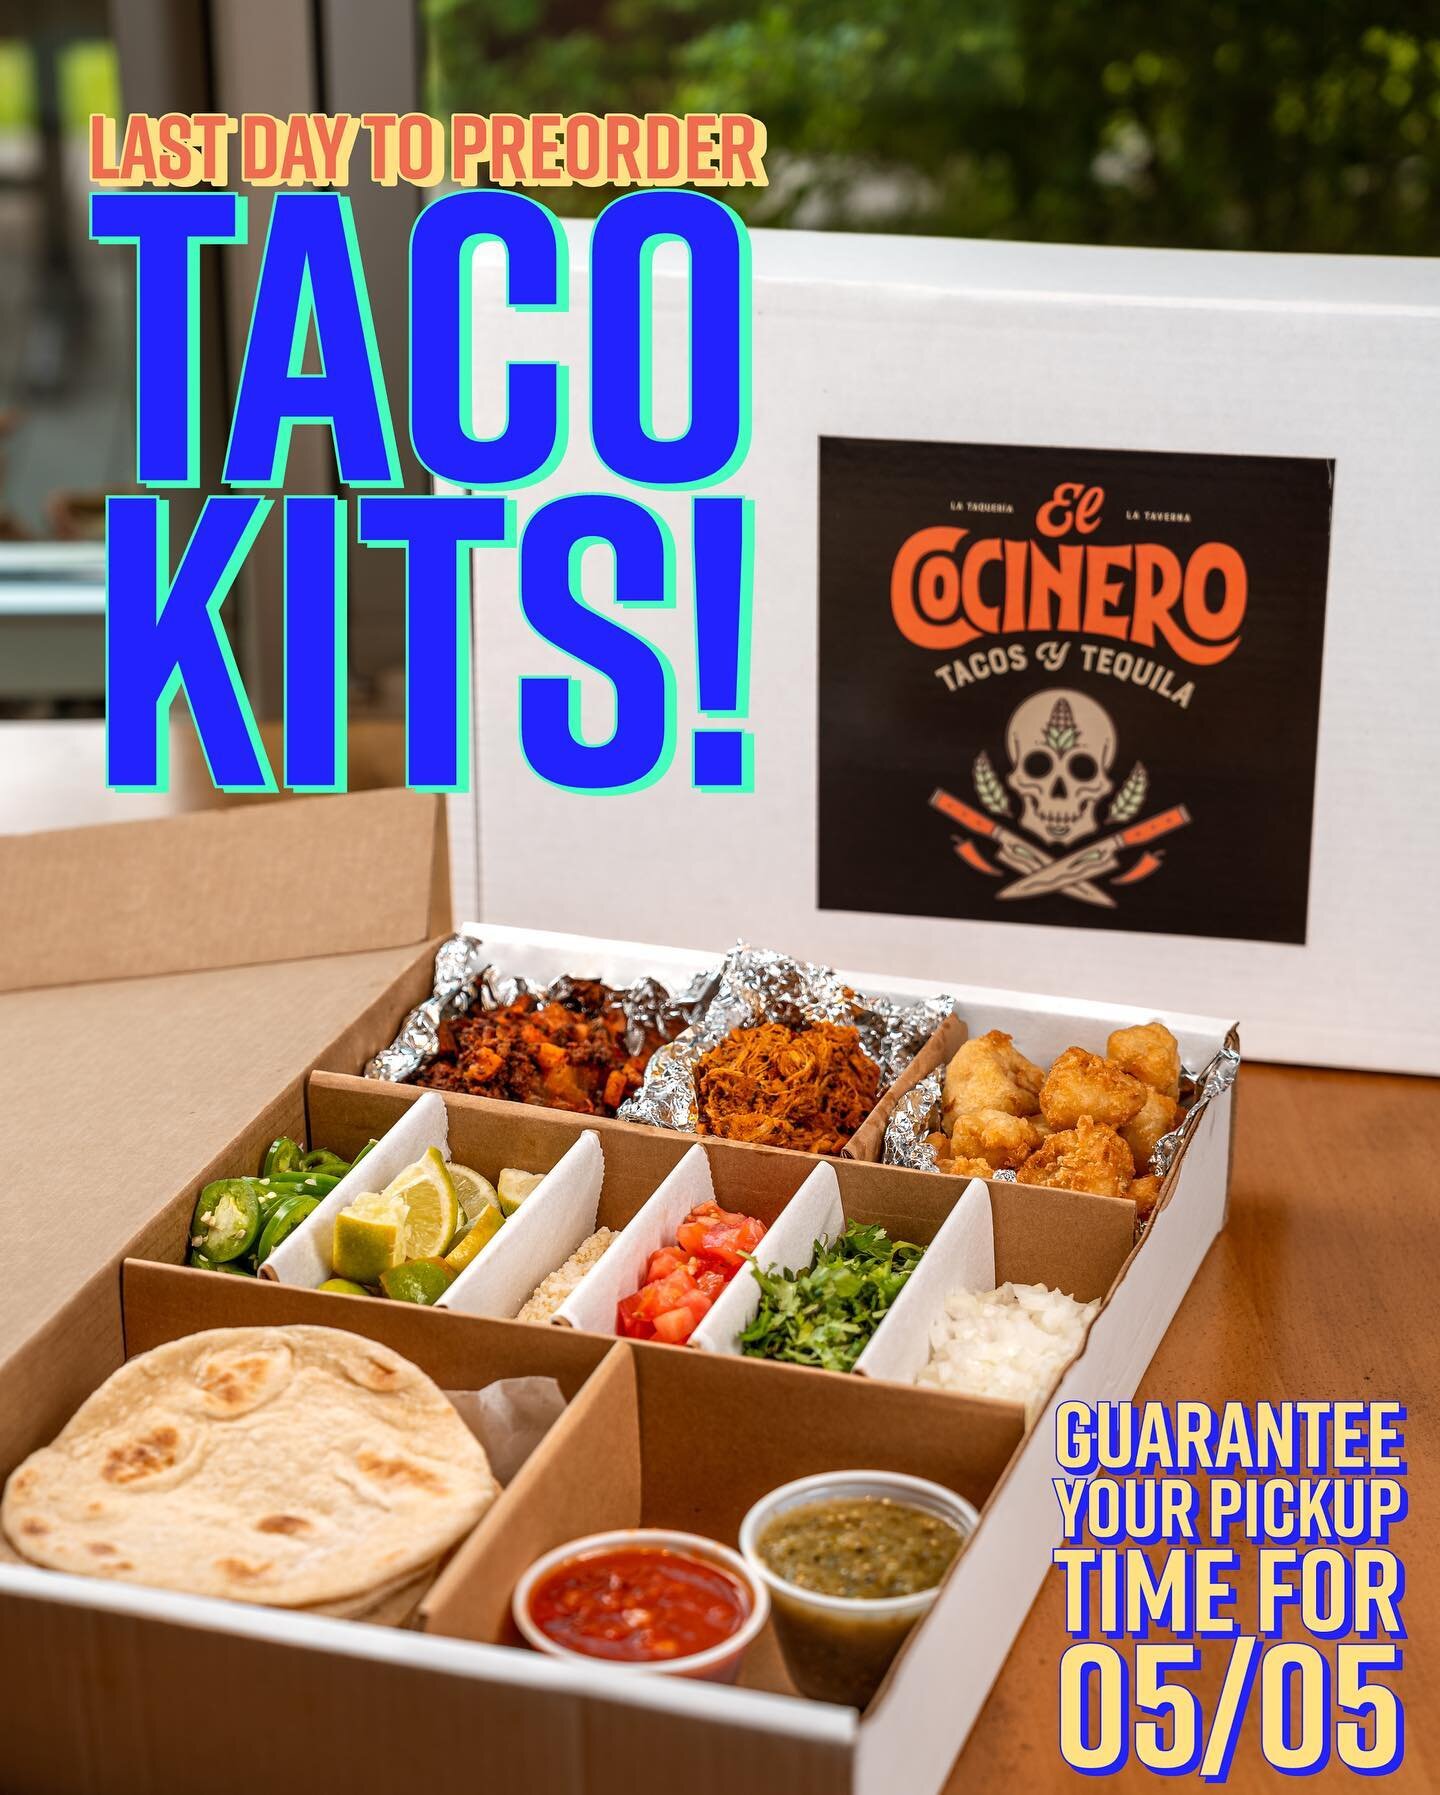 LAST DAY to preorder your Taco Kit! Call us today, 5pm-10pm, to place your order and choose your pickup time for tomorrow!

To pre-order your custom Taco Kit, please give us a call during business hours at 850-329-6591 and choose your pickup time! Be